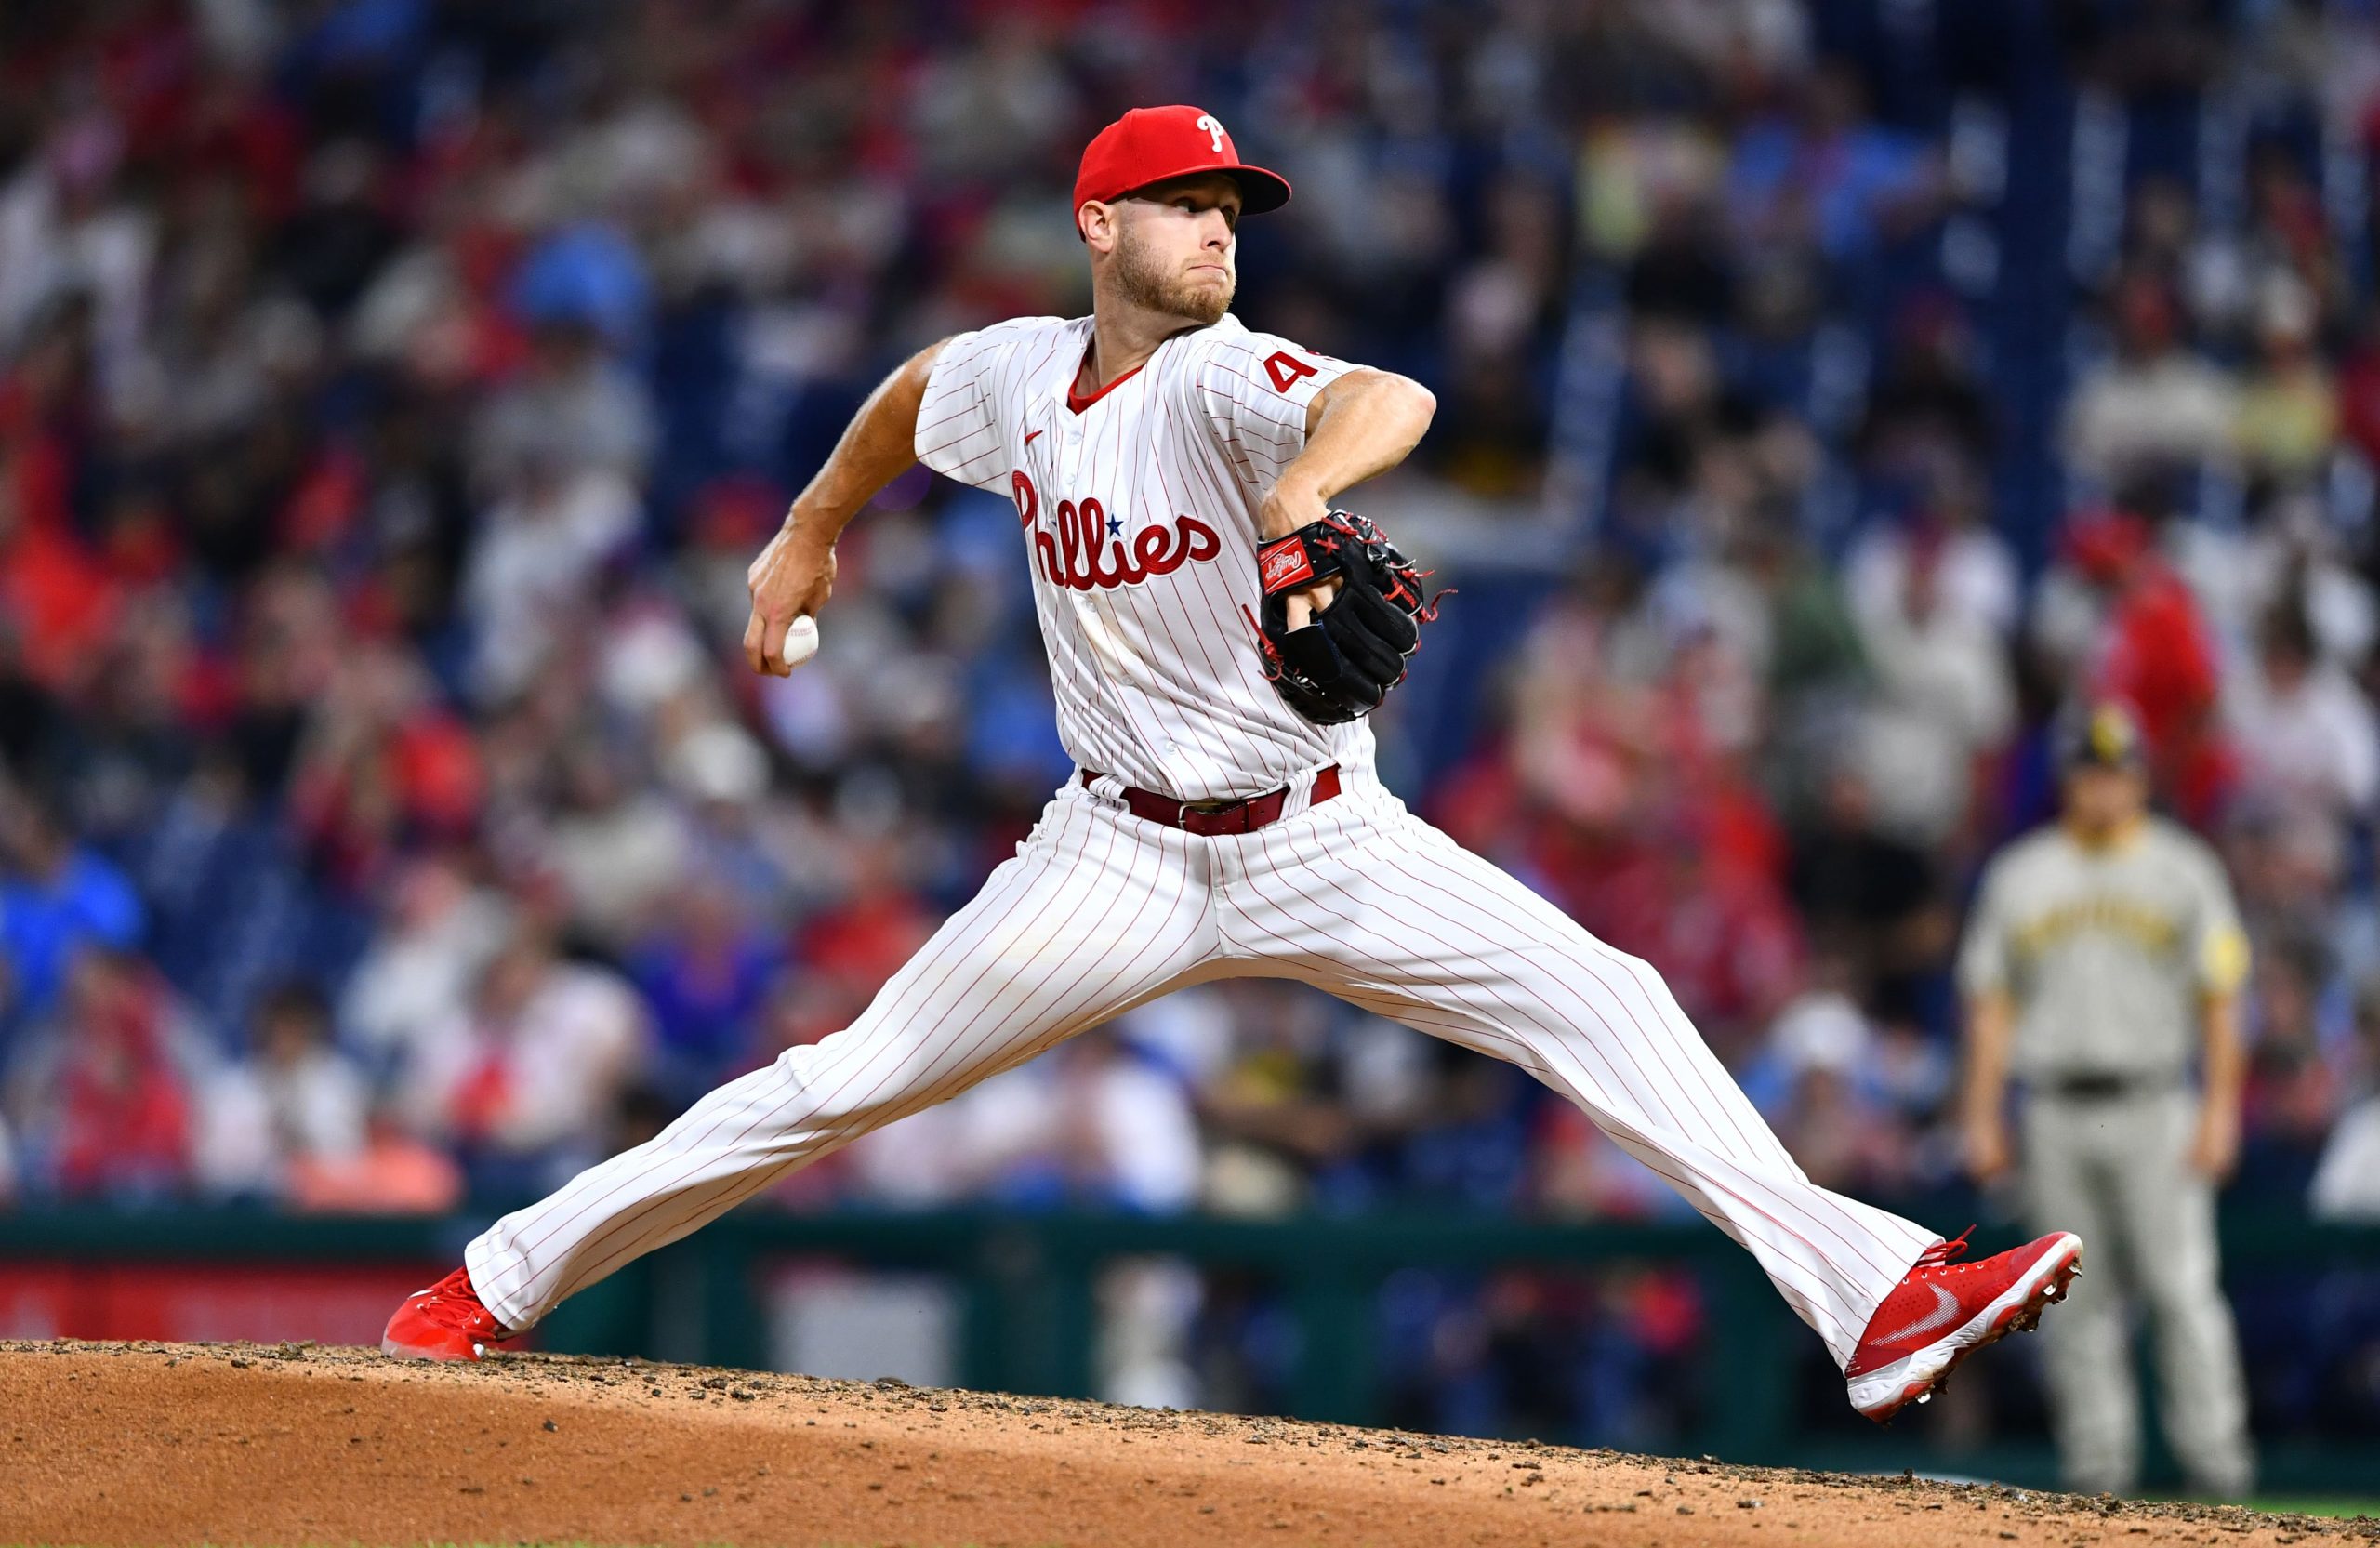 Philadelphia Phillies pitcher Zack Wheeler (45) throws a pitch against the San Diego Padres in the sixth inning at Citizens Bank Park.